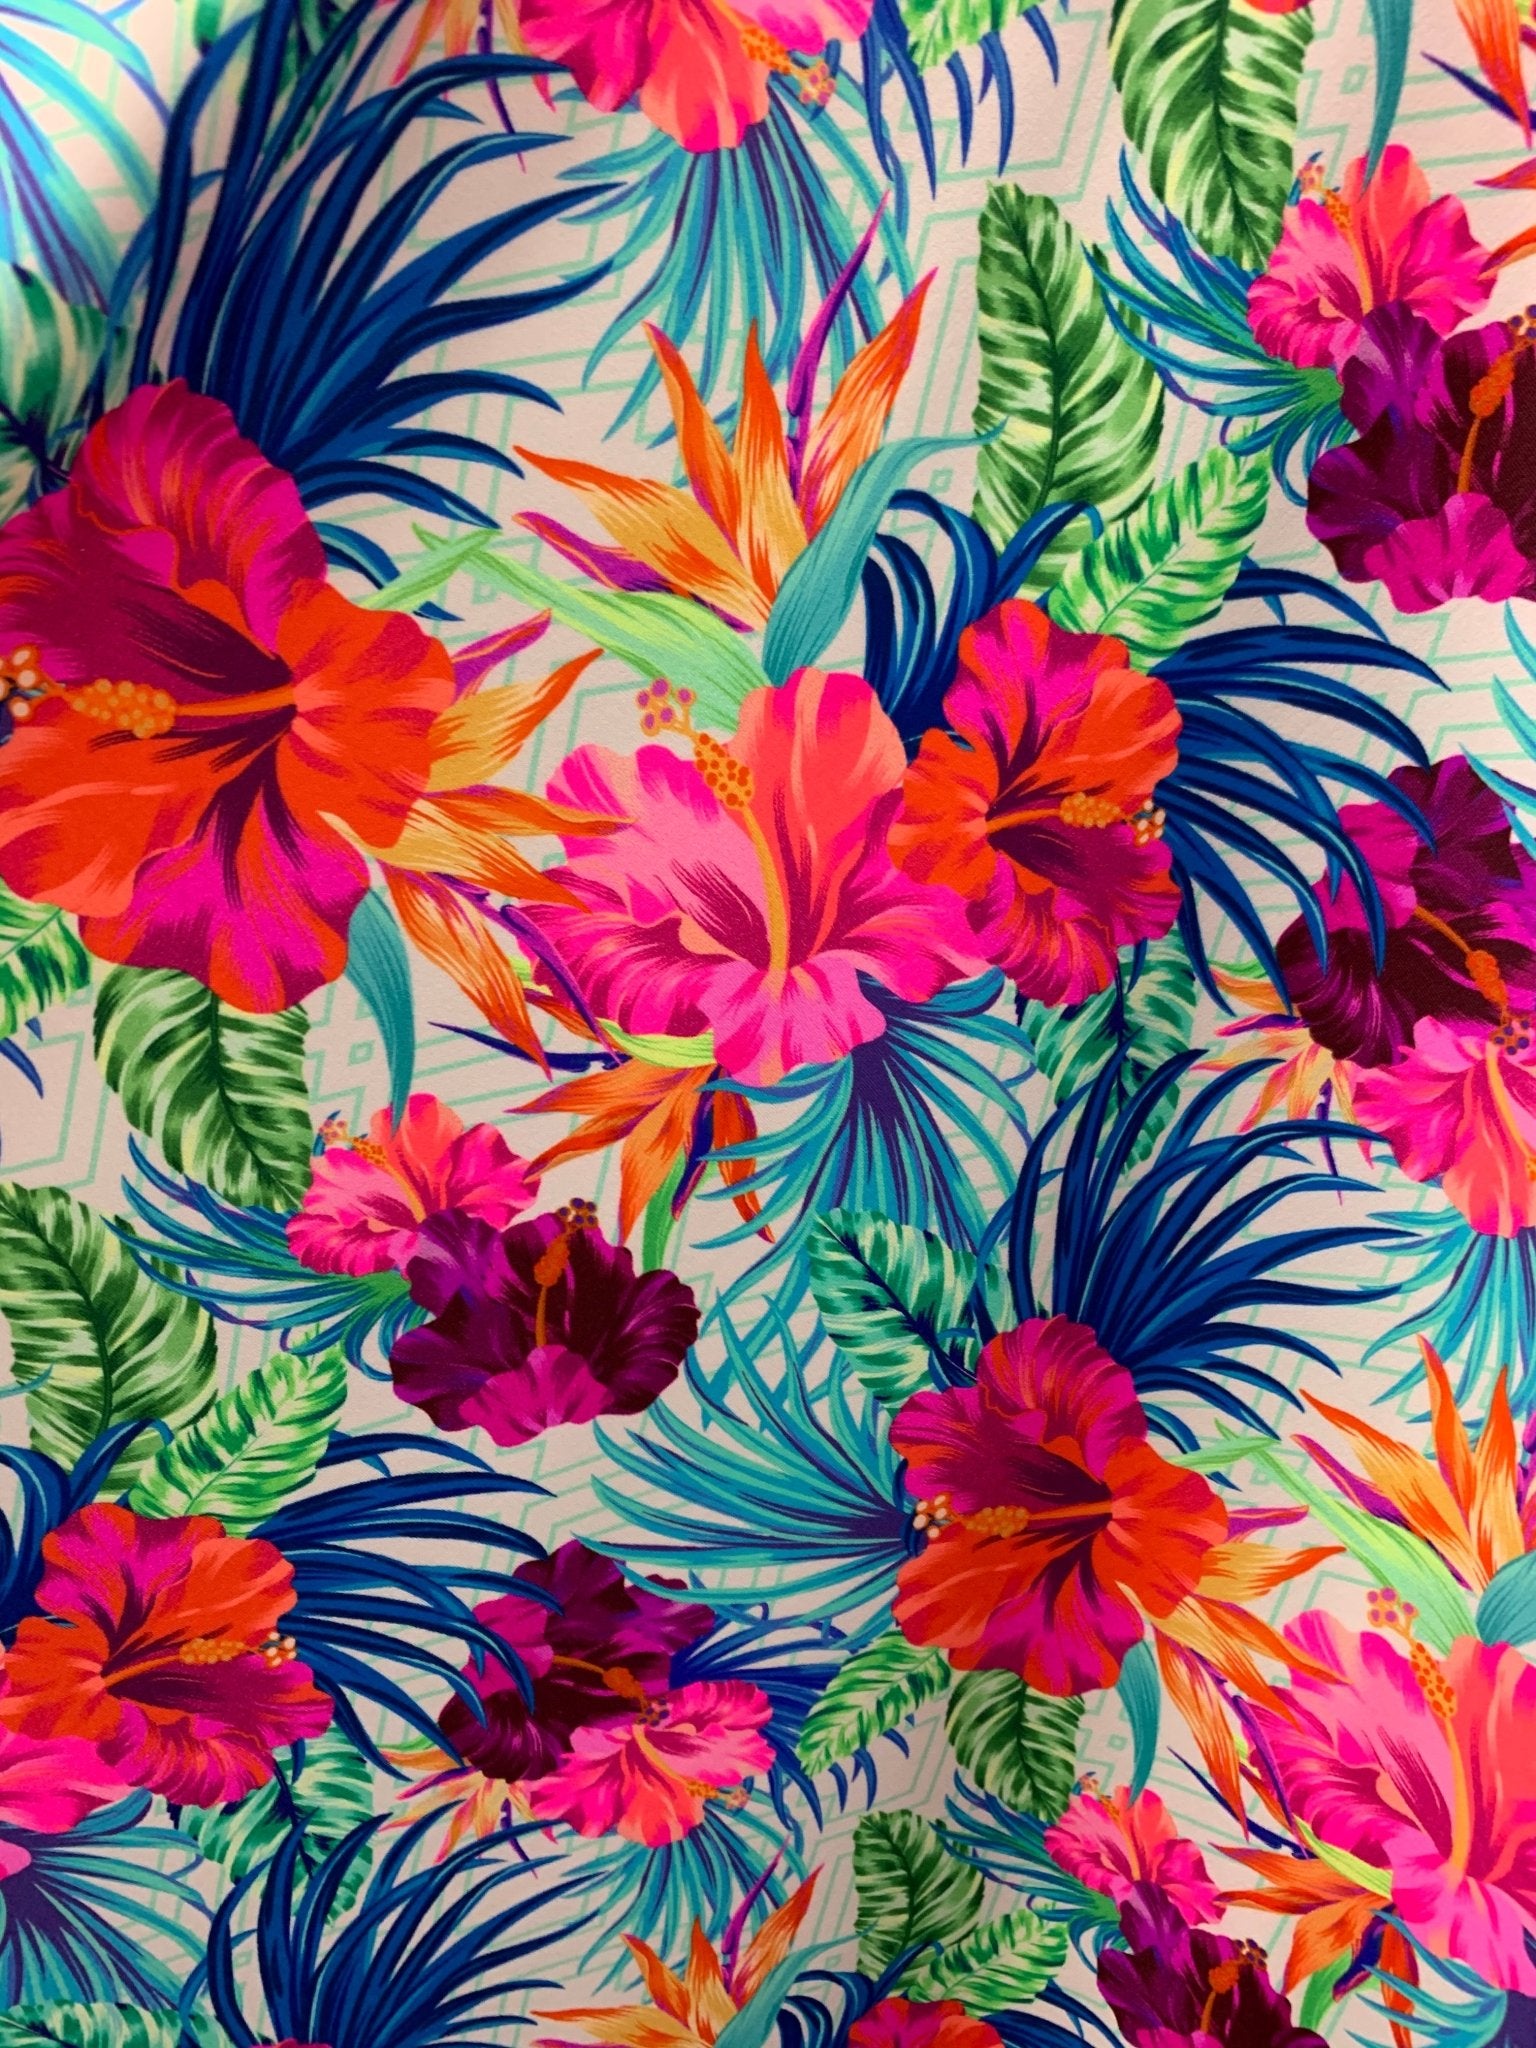 Hawaii Print Floral Nylon Spandex Swimsuit Fabric By The YardSpandex FabricICEFABRICICE FABRICSHawaii Print Floral Nylon Spandex Swimsuit Fabric By The Yard ICEFABRIC